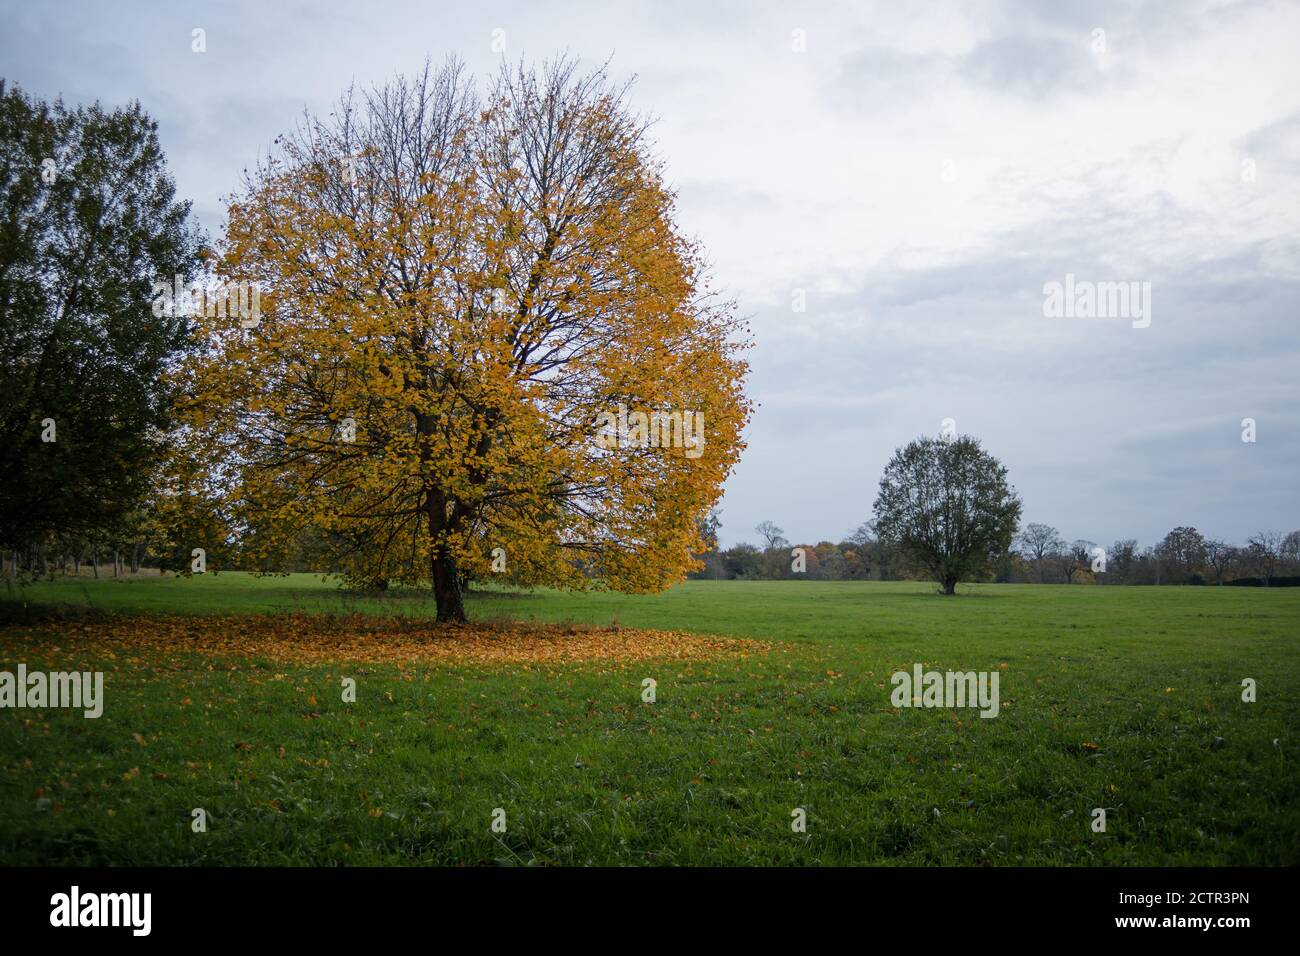 Yellow tree with falling leaves all over the green grass. Autumn landscape Stock Photo